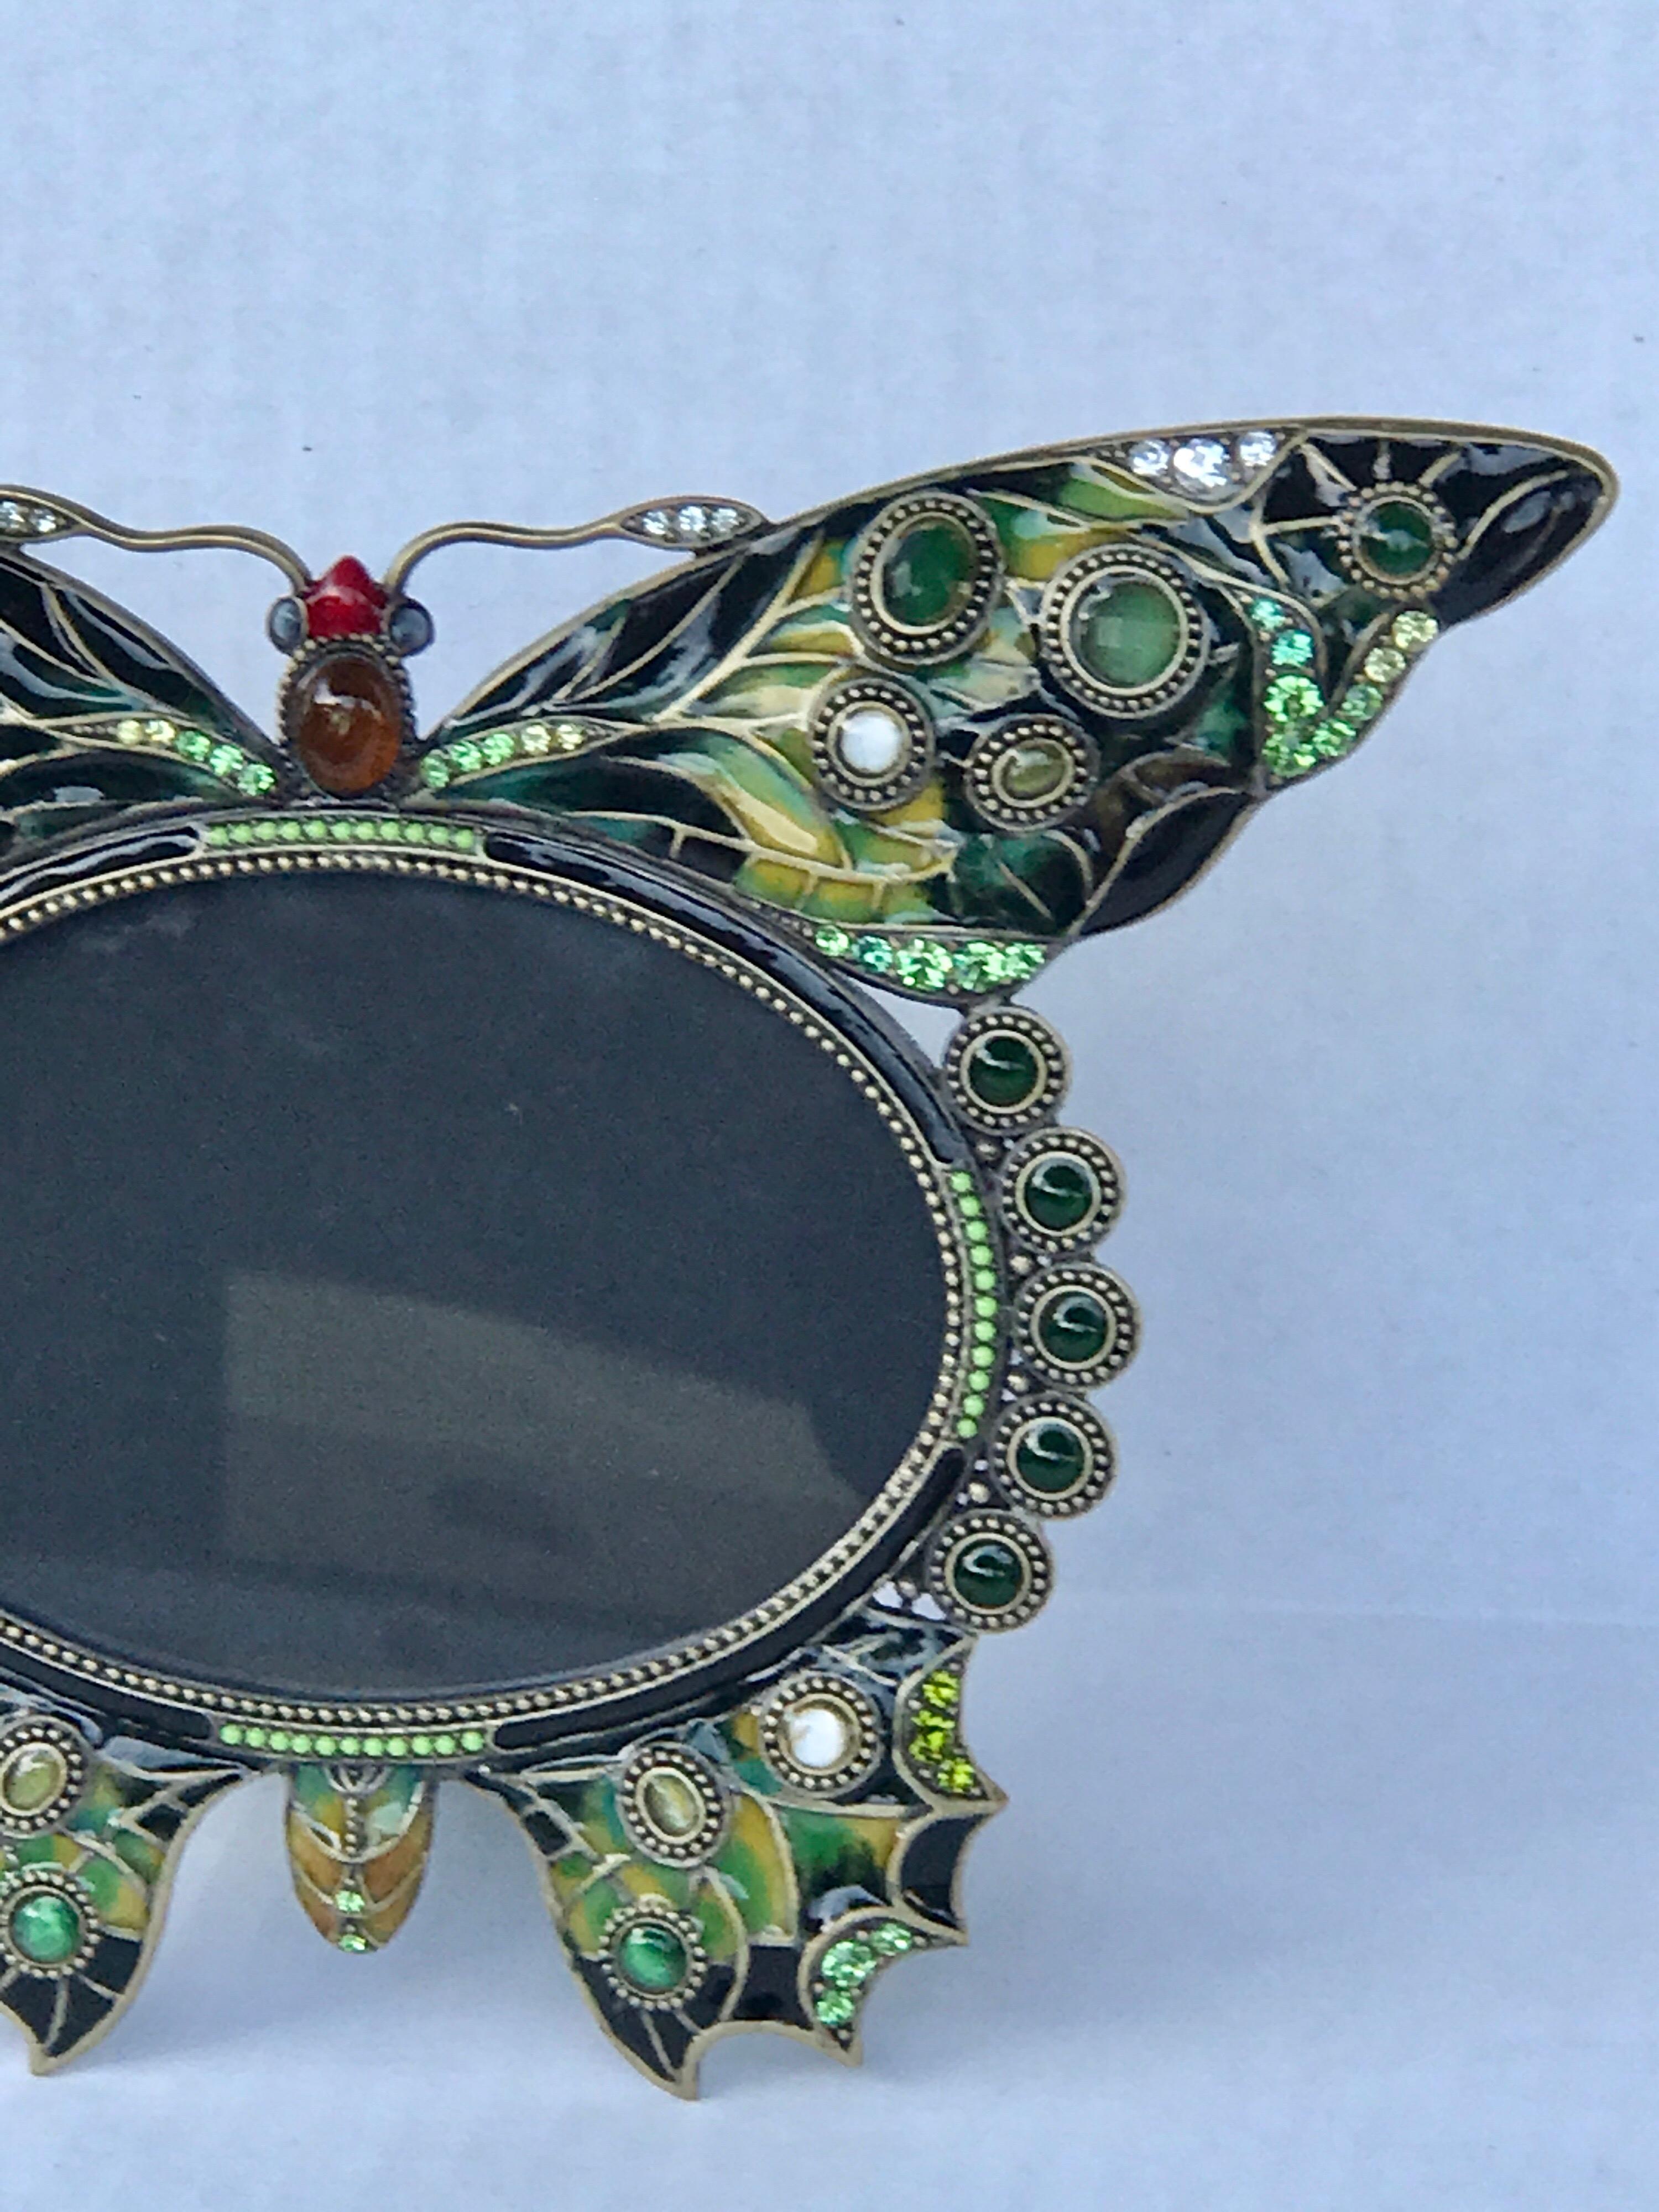 Enameled and jeweled butterfly frame, in the manner of Jay Strongwater, holds a 3